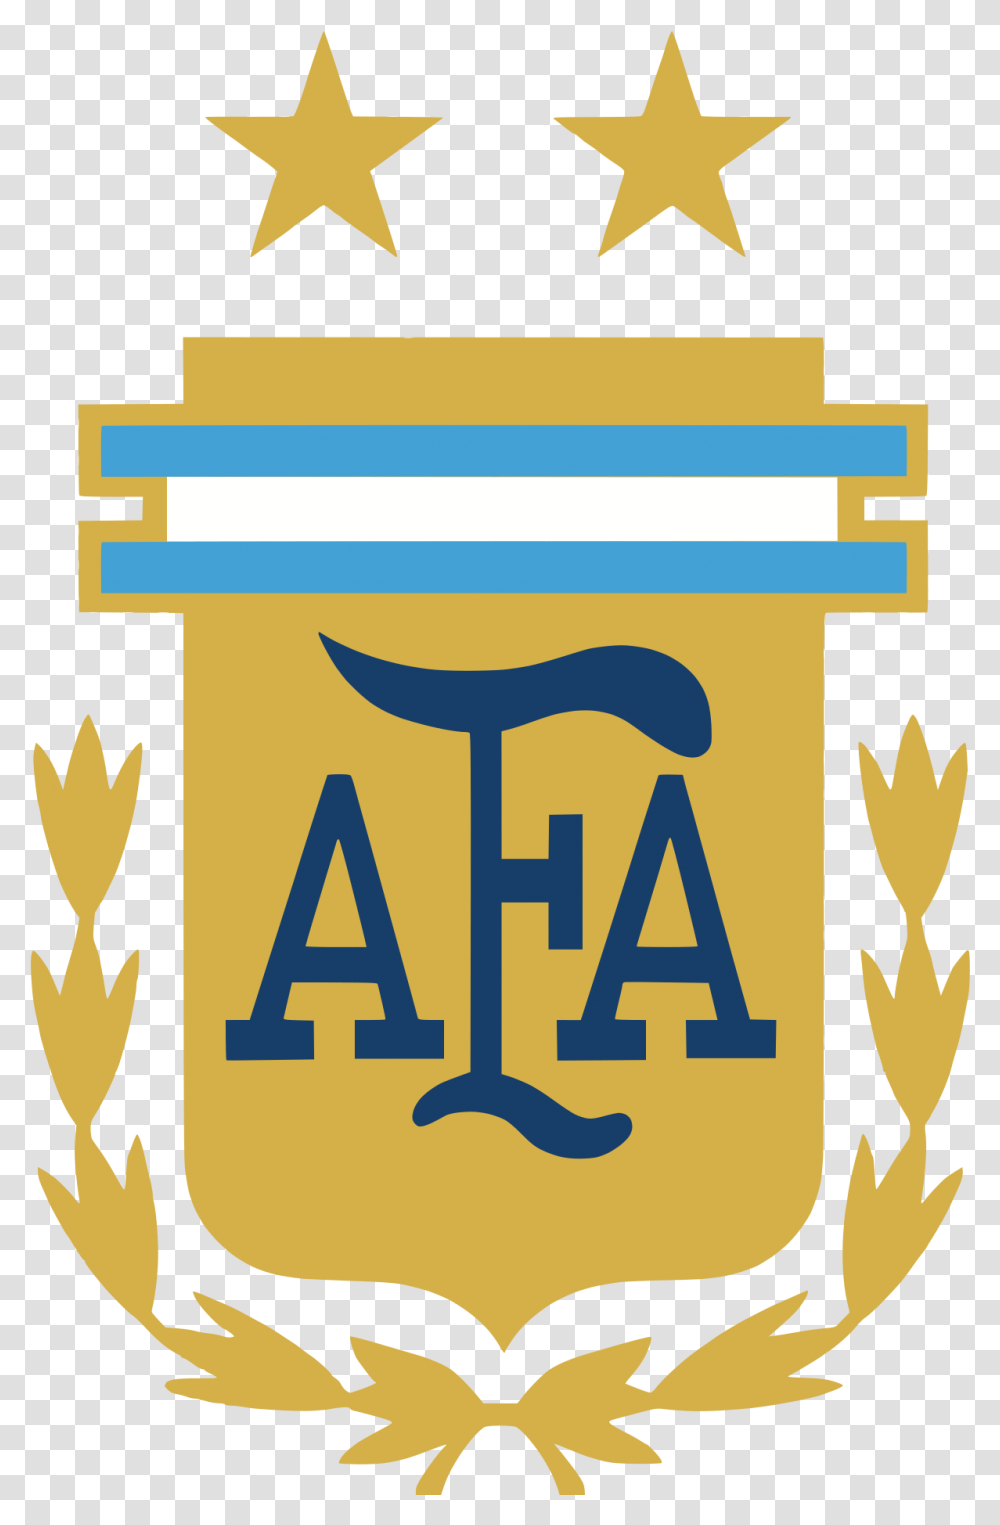 Argentina National Football Team Wikipedia Argentina National Football Team Logo, Label, Text, Symbol, Paper Transparent Png